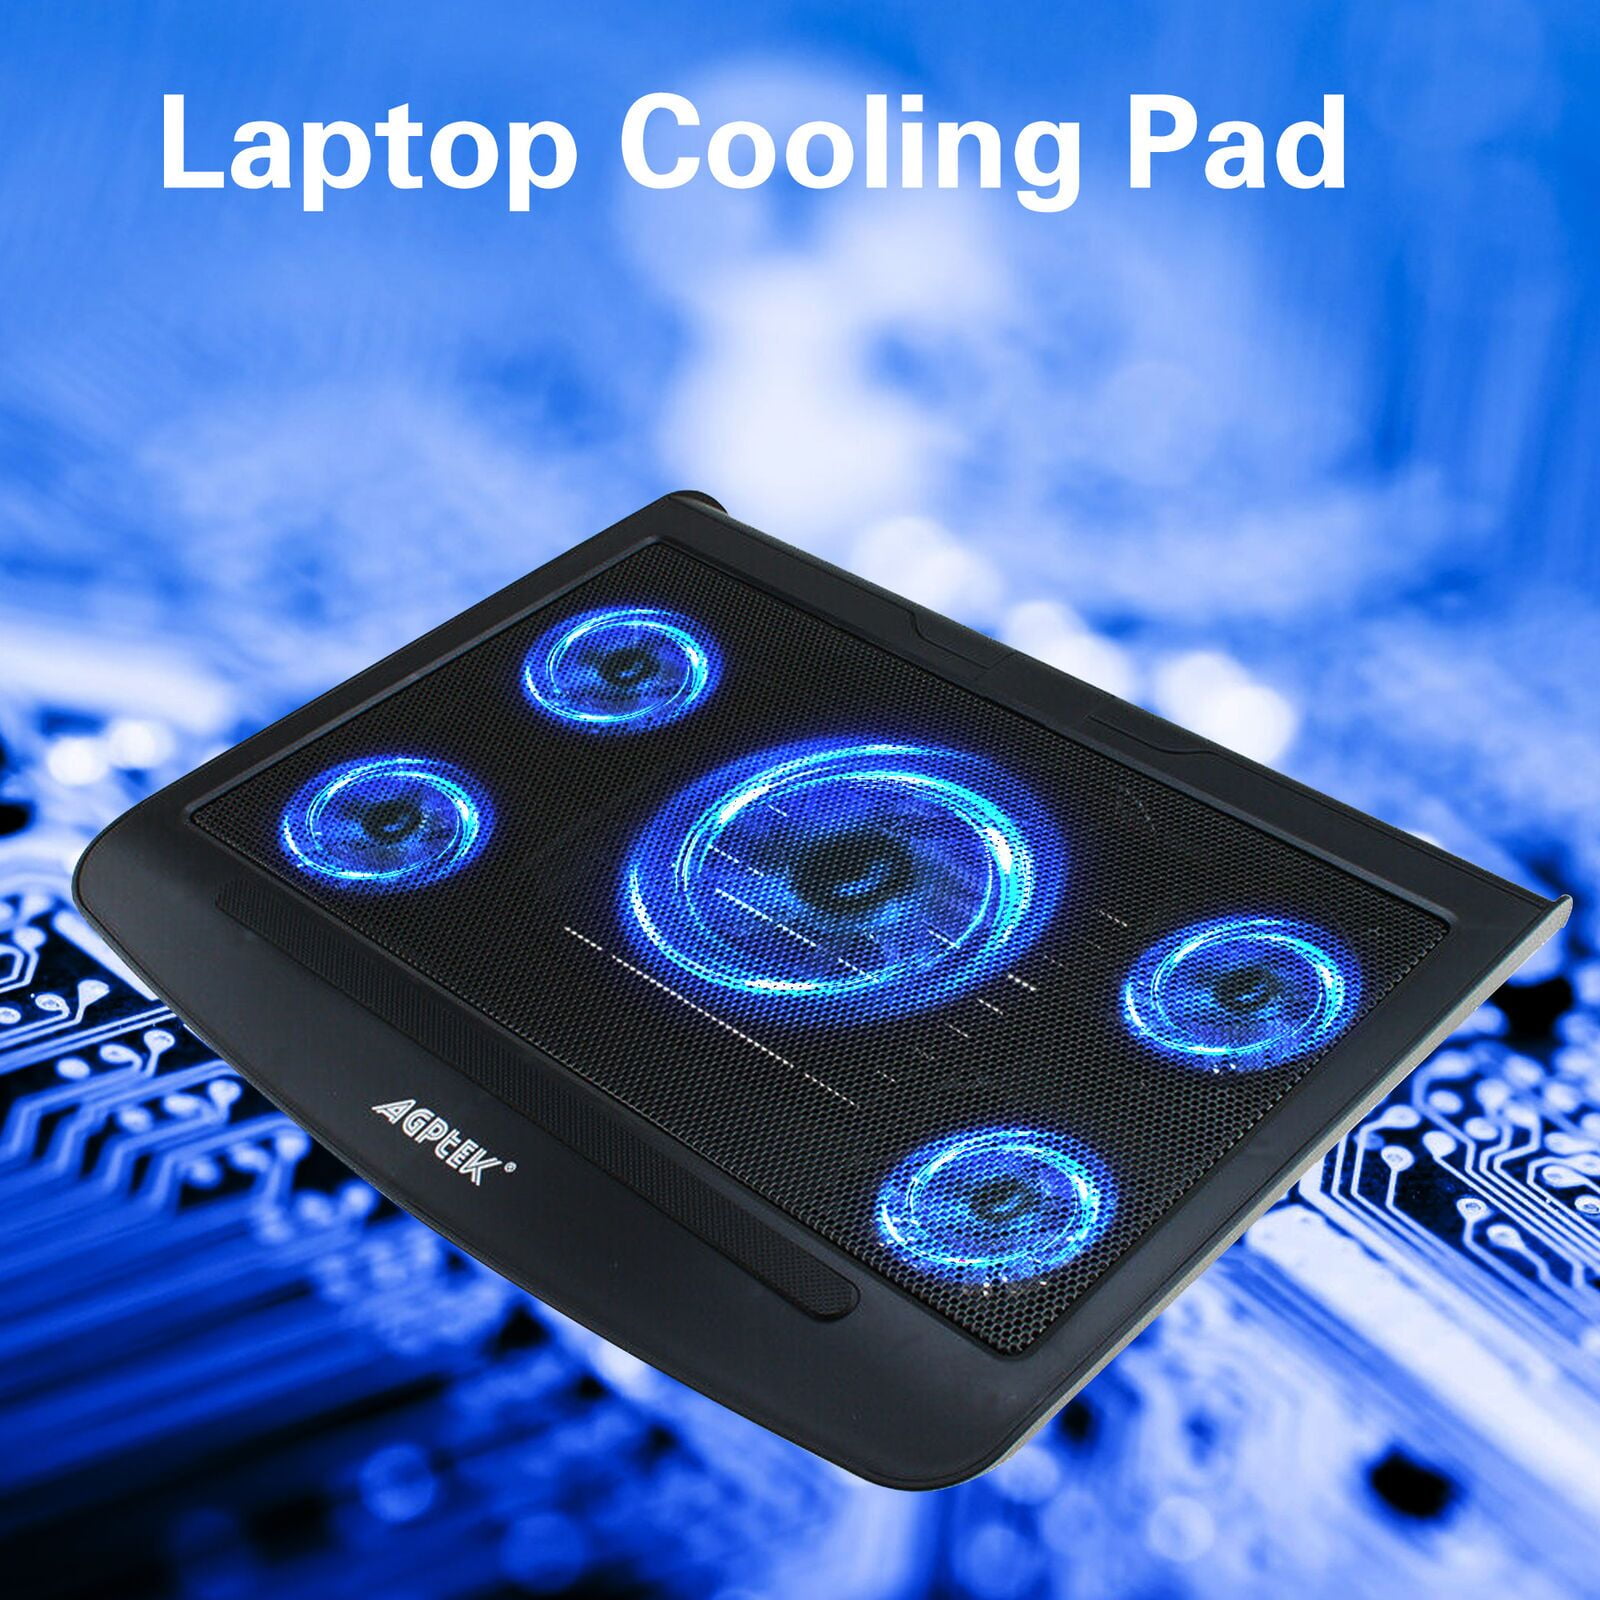 Laptop Double USB Powered Fan Cooling Pad Stand For Notebook Laptop Portable PR1